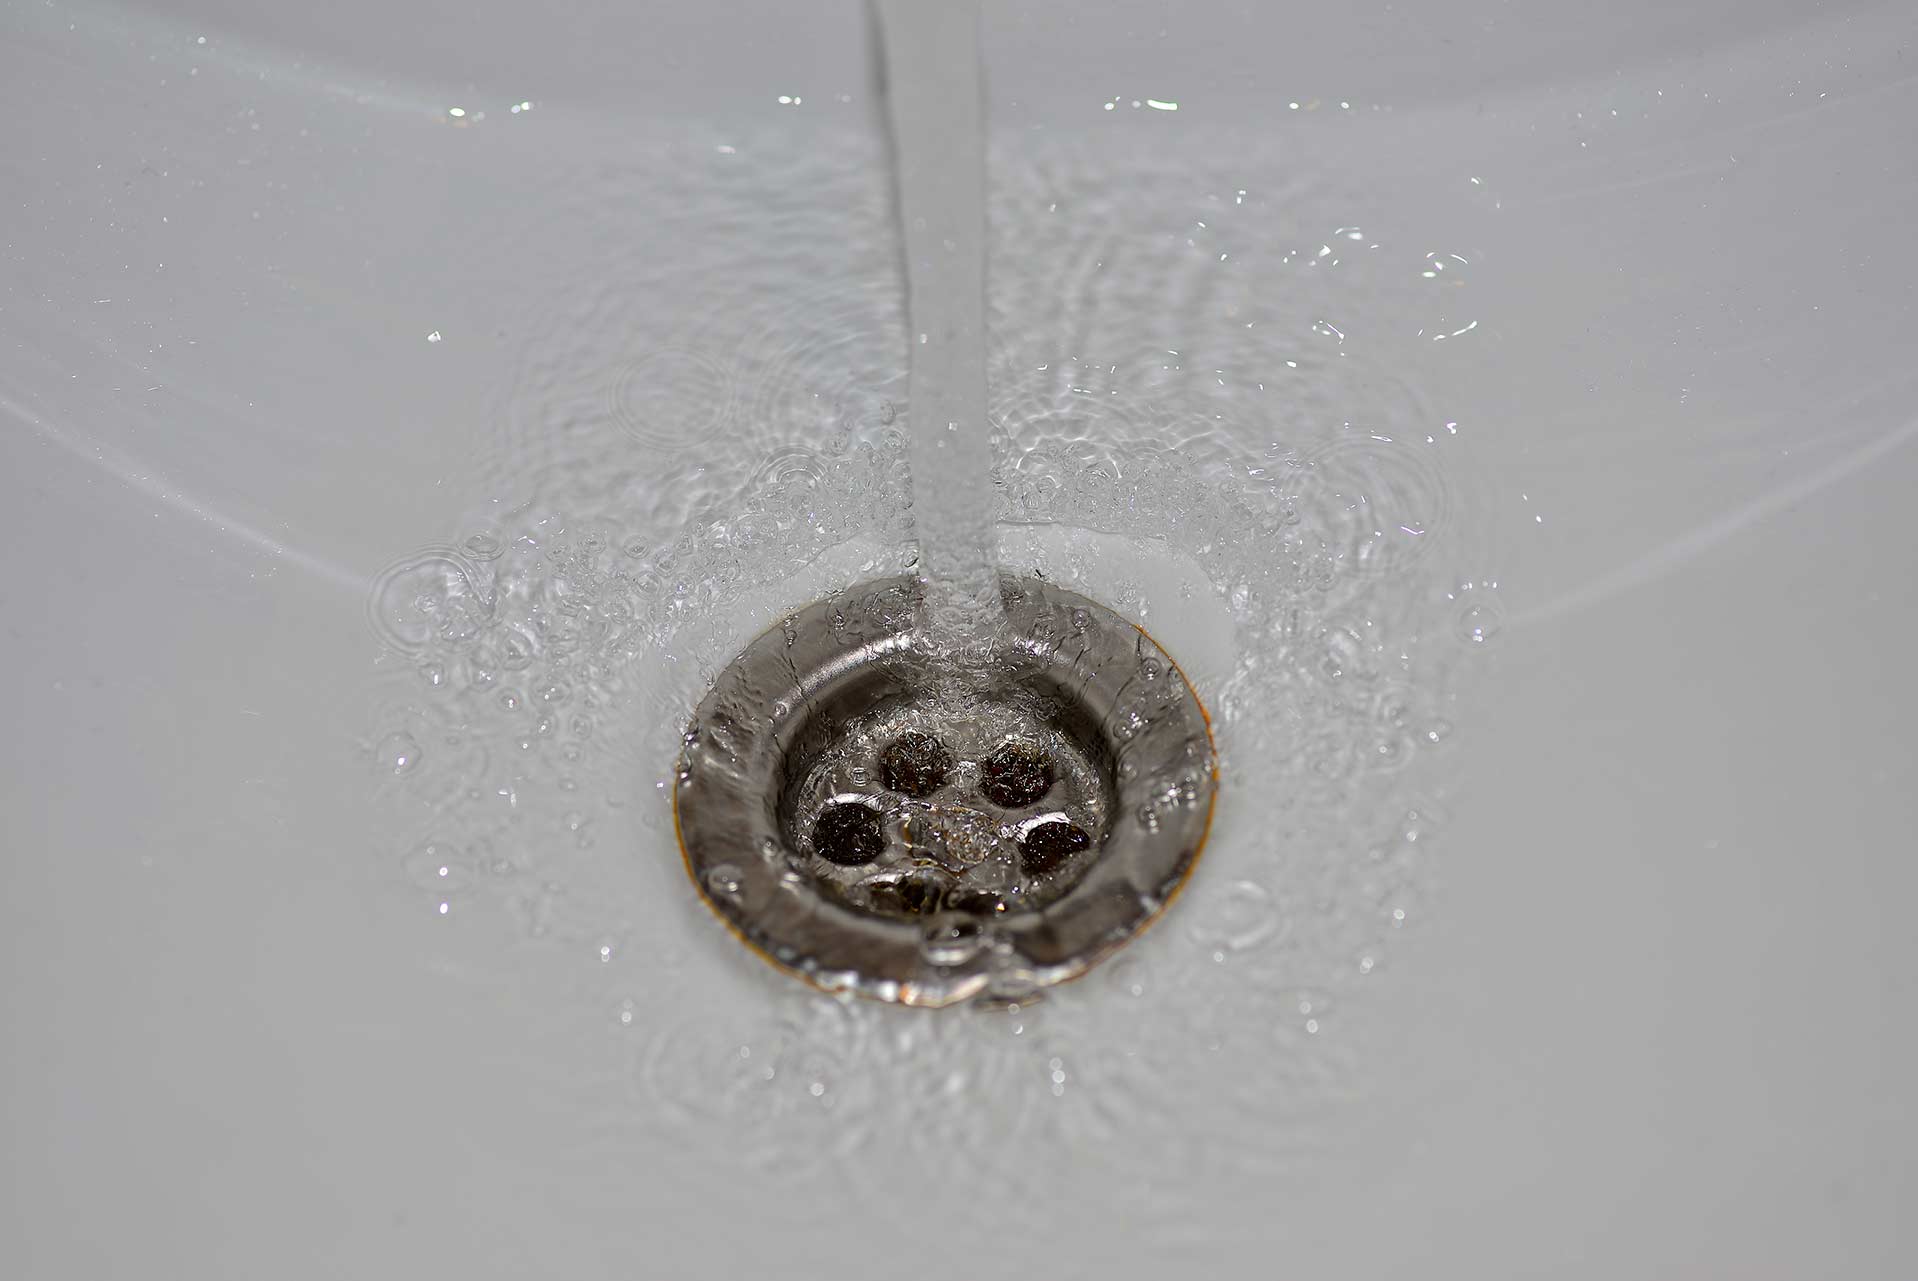 A2B Drains provides services to unblock blocked sinks and drains for properties in Weston Super Mare.